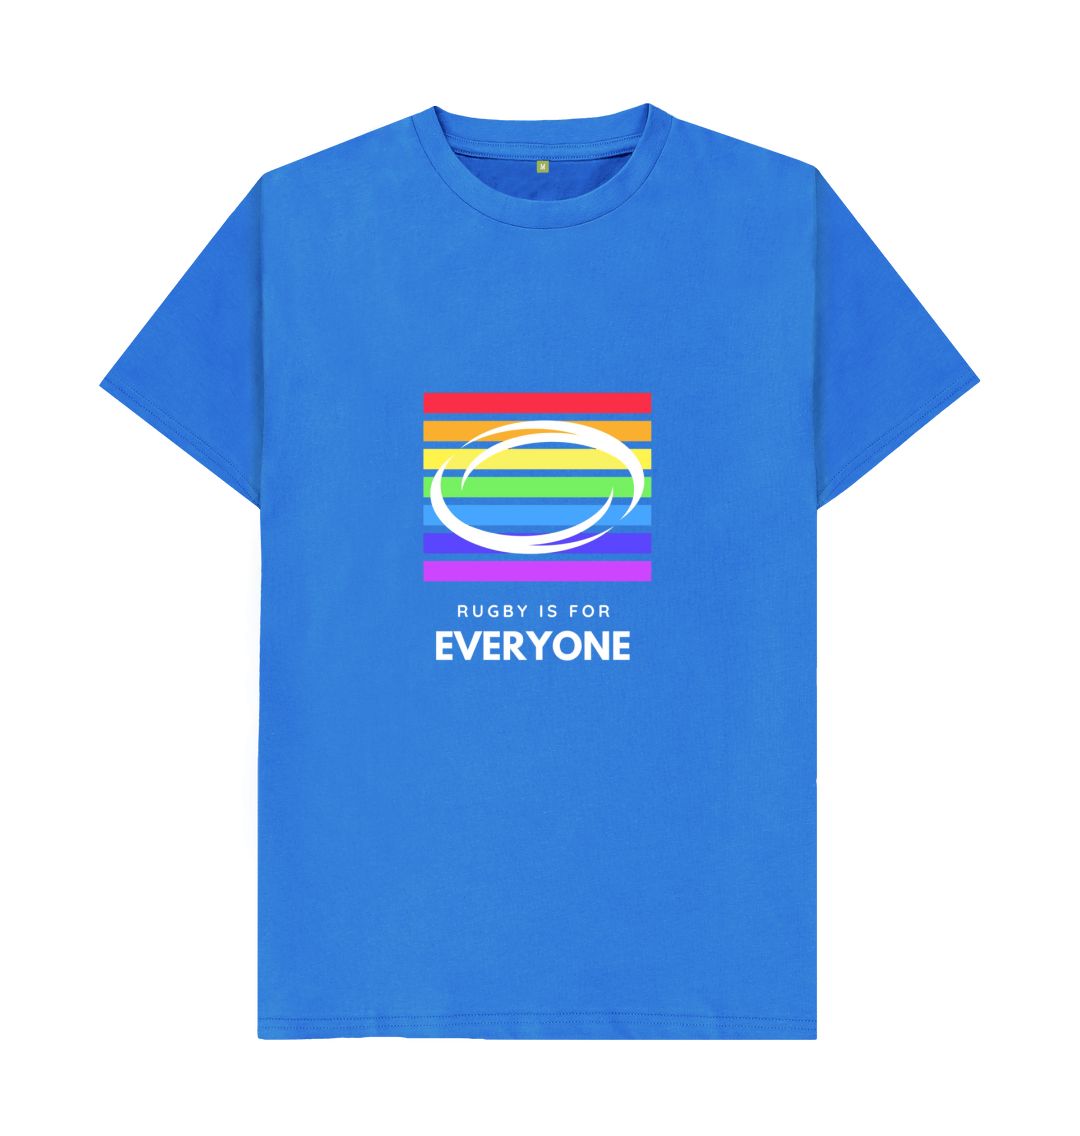 Bright Blue Adults T-Shirt - Rugby is for everyone